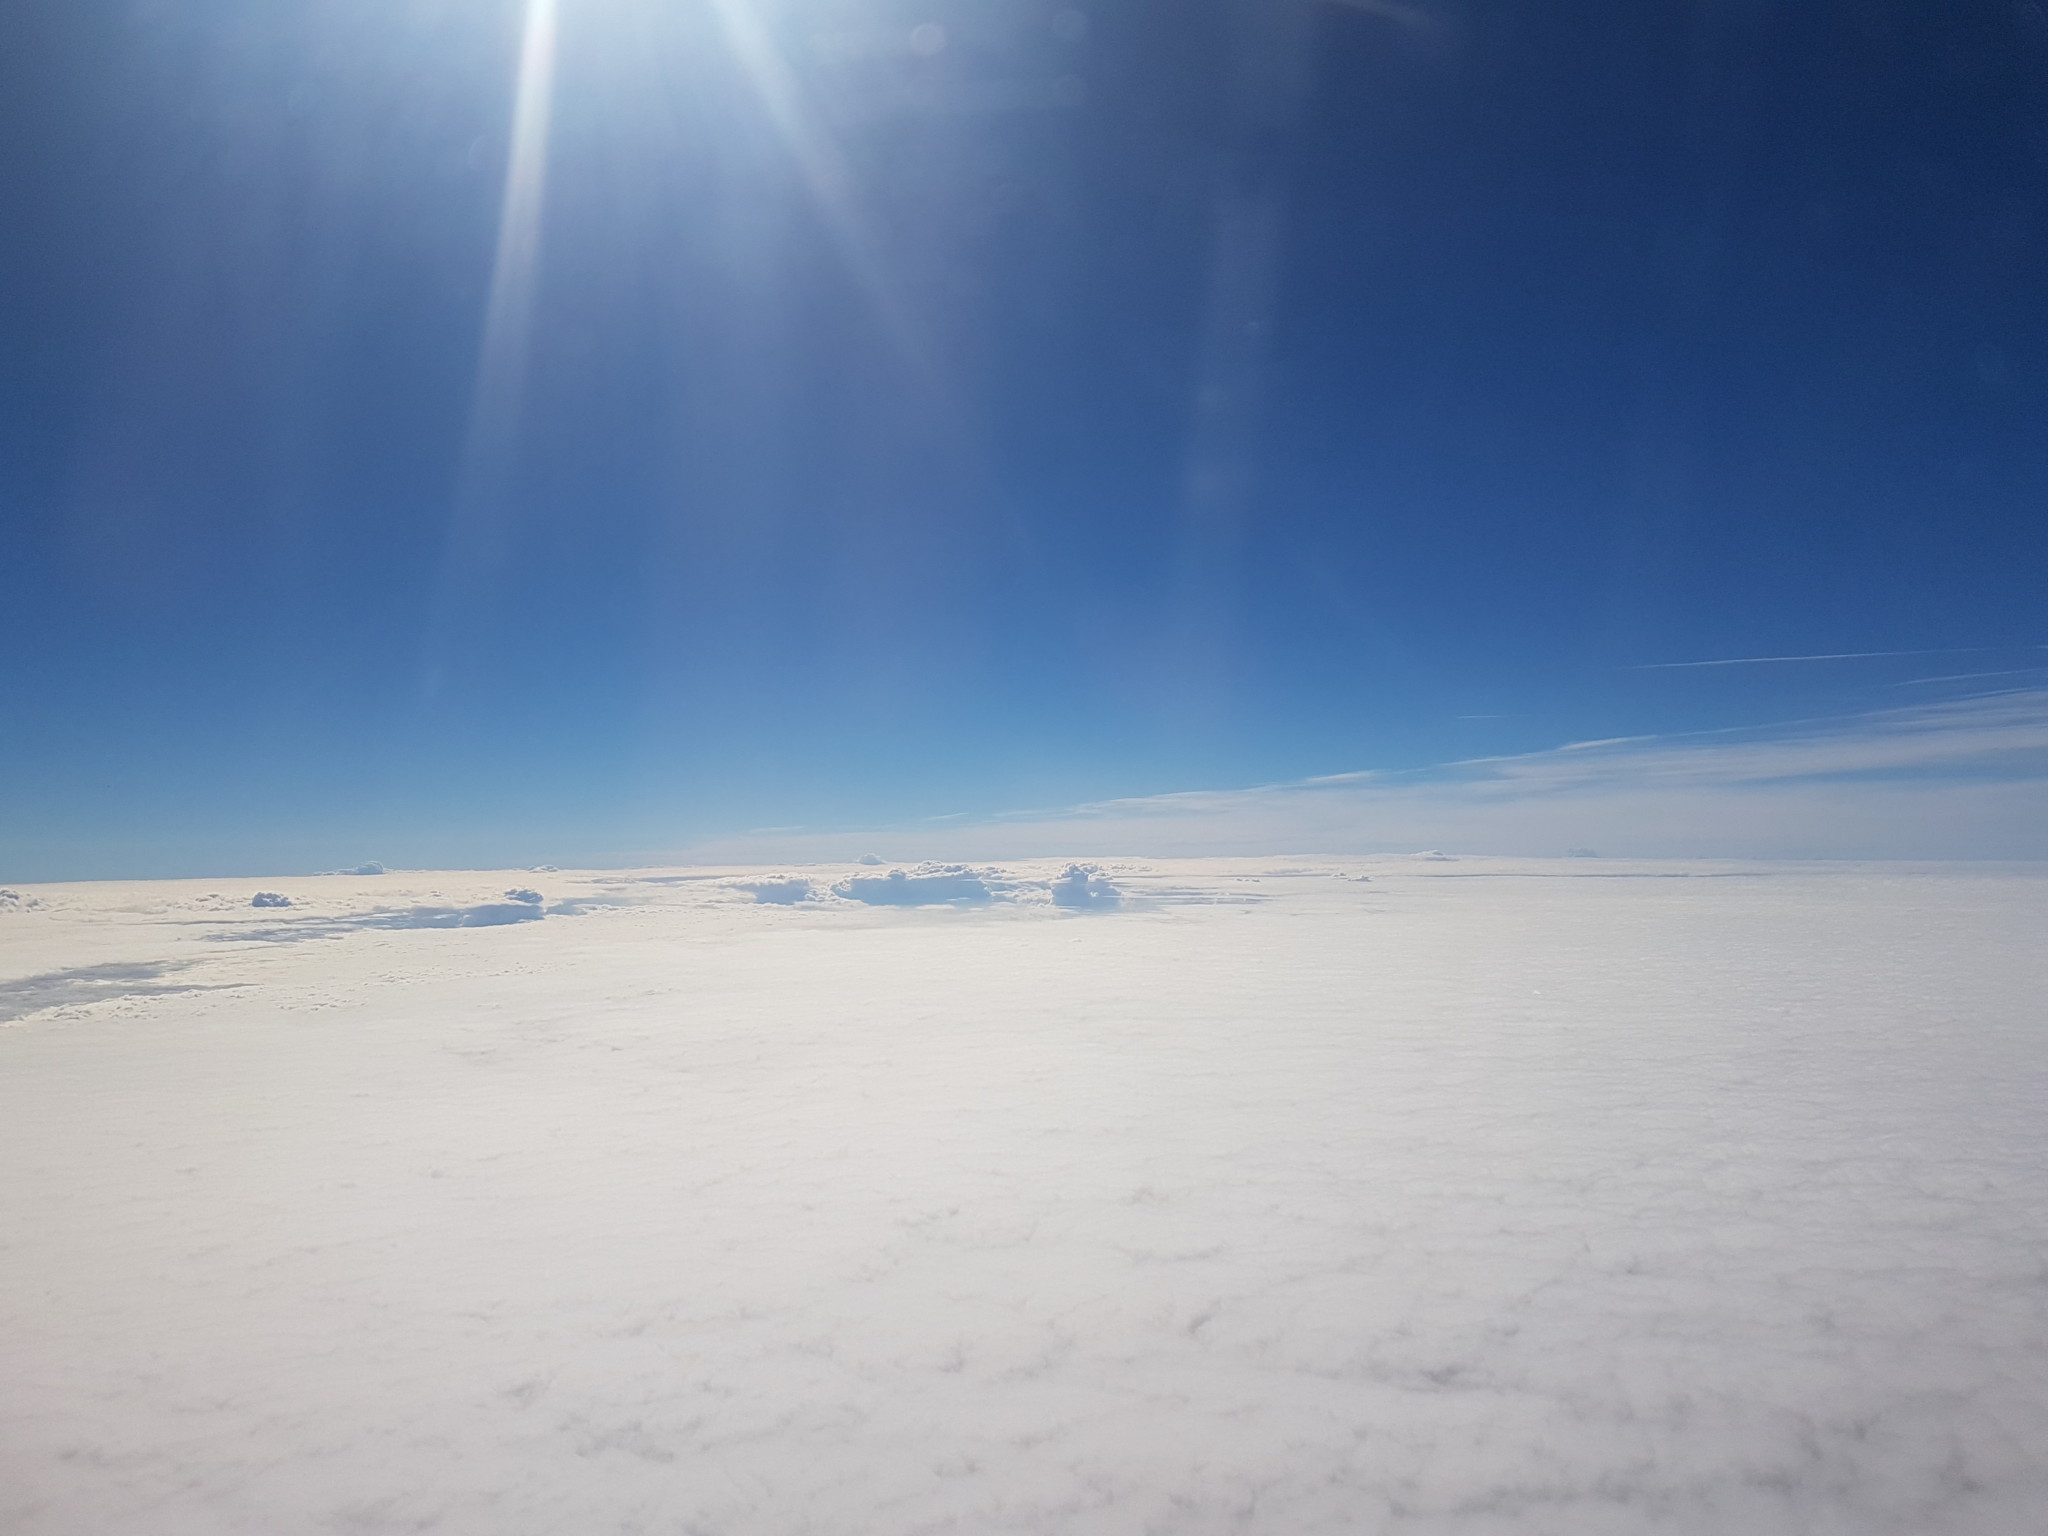 Cool Cloud Formation - Flight to Gdansk